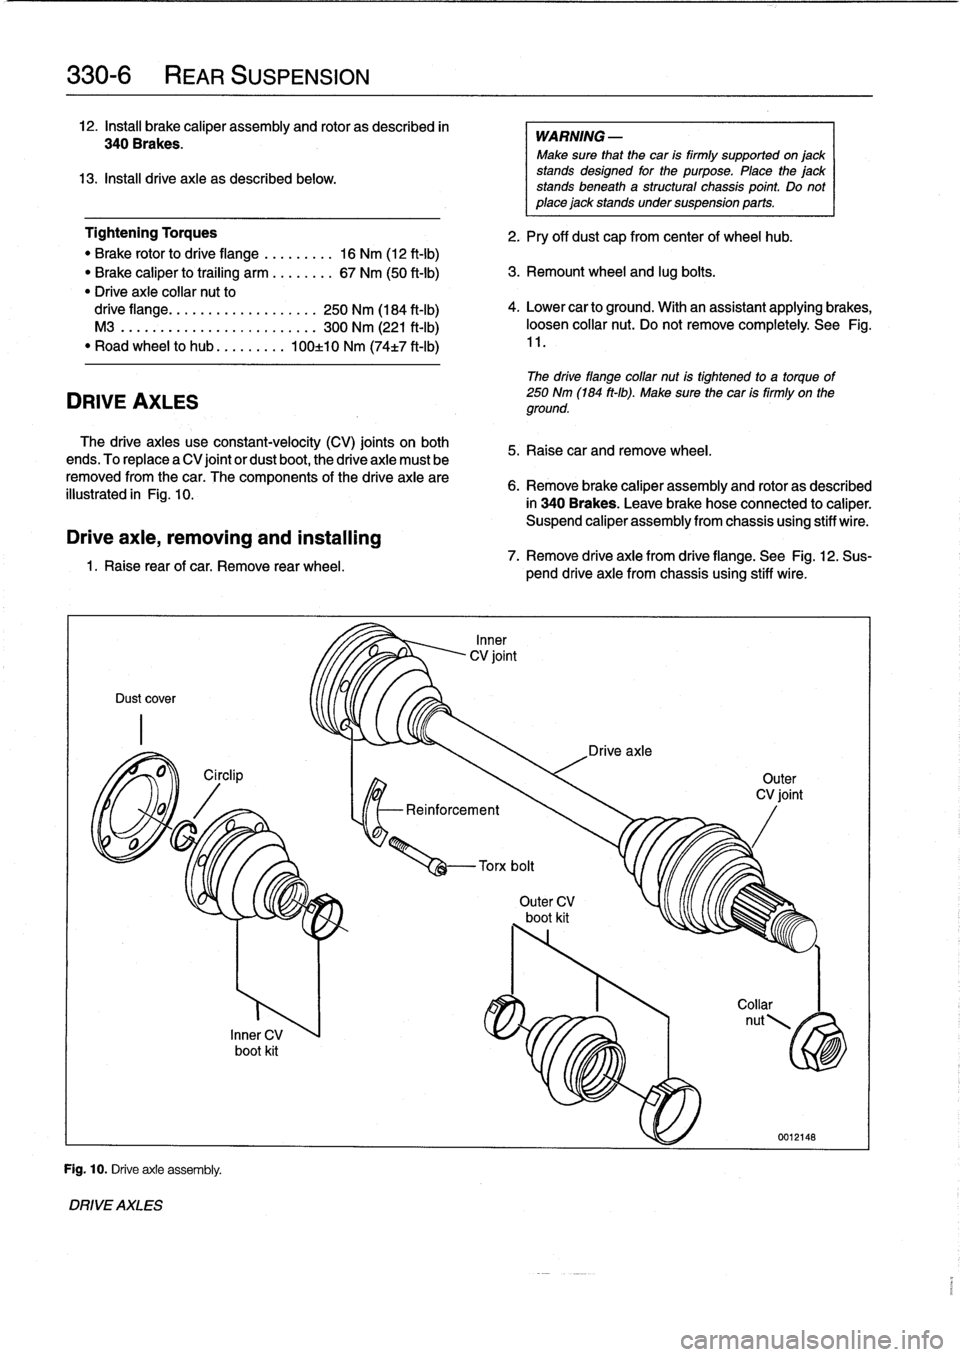 BMW 318i 1997 E36 Service Manual 
330-
6

	

REAR
SUSPENSION

12
.
Install
brake
caliper
assembly
and
rotor
as
described
in

340Brakes
.

13
.
Install
drive
axie
as
described
below
.

Tightening
Torques

"
Brake
rotor
to
drive
flange